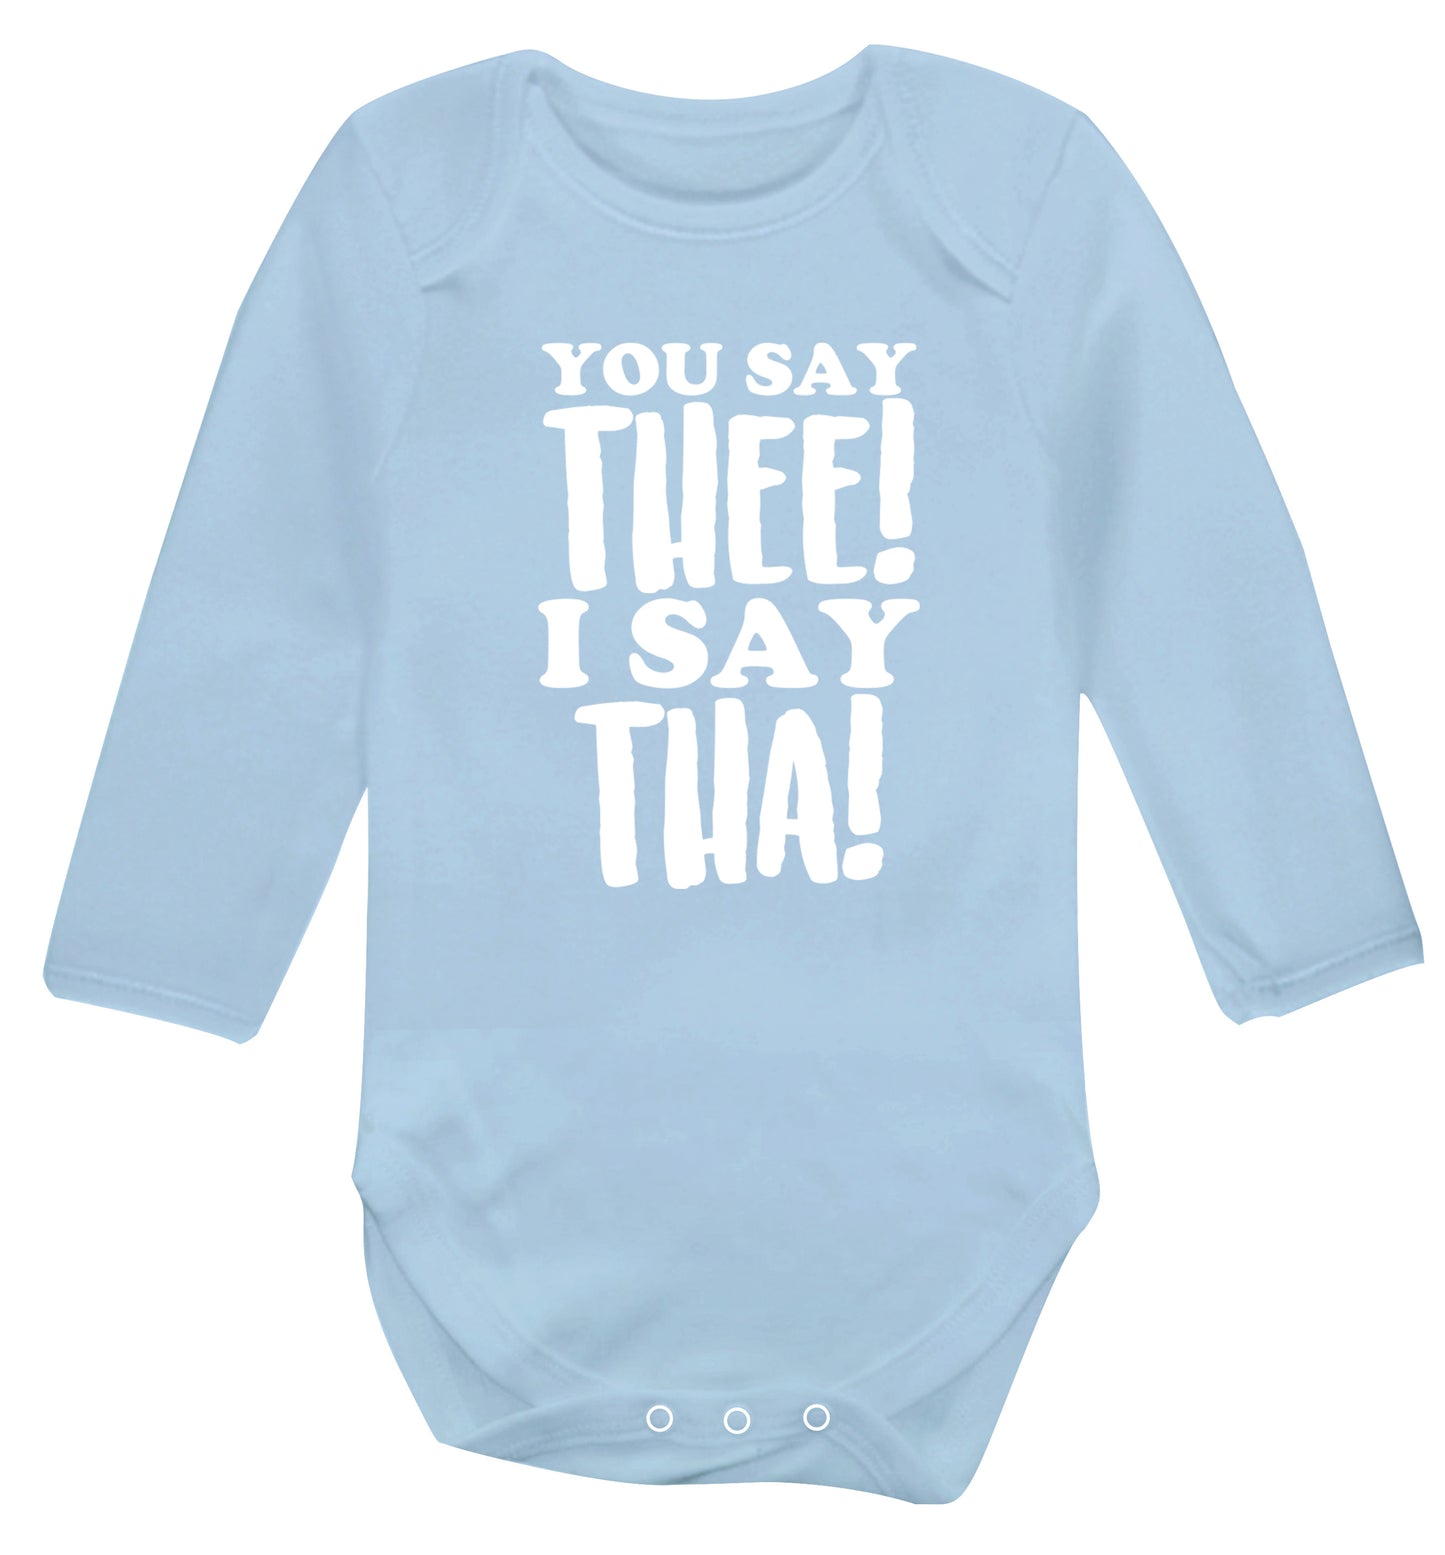 You say thee I say tha Baby Vest long sleeved pale blue 6-12 months